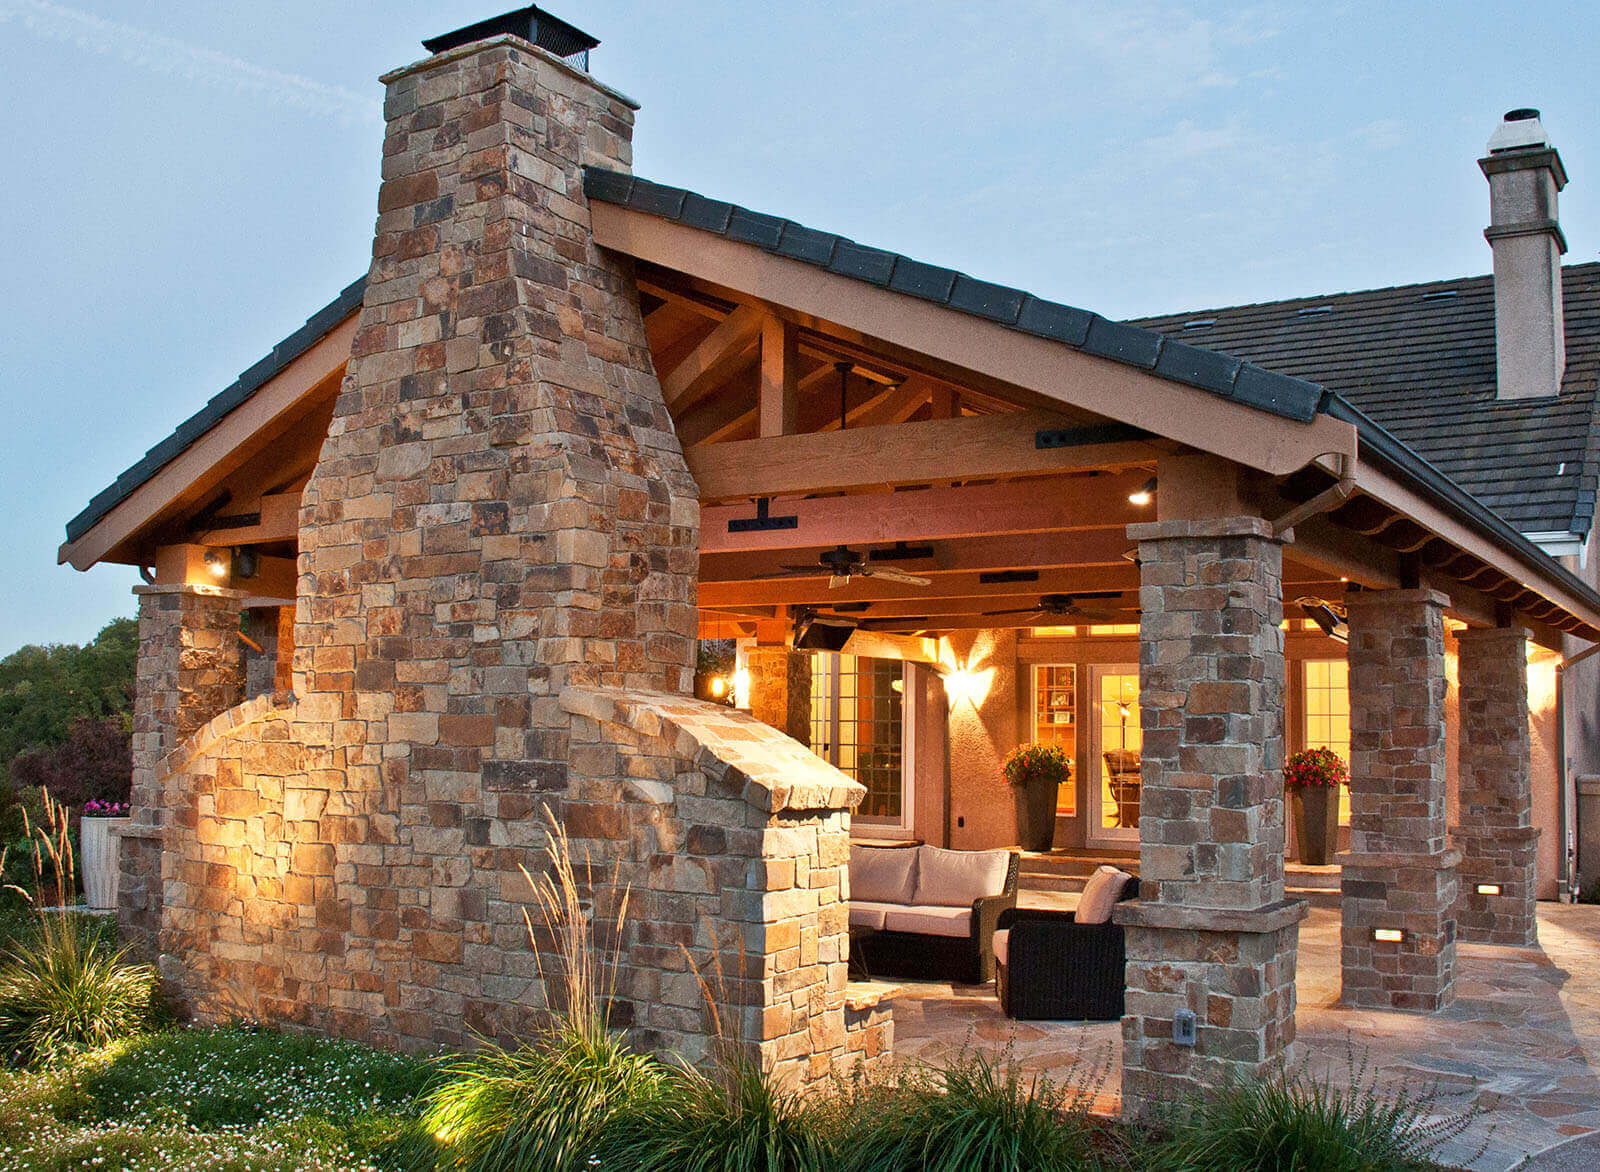 Outdoor warmly lit roofed lounging patio with stone tile columns and fireplace with view of yard behind it